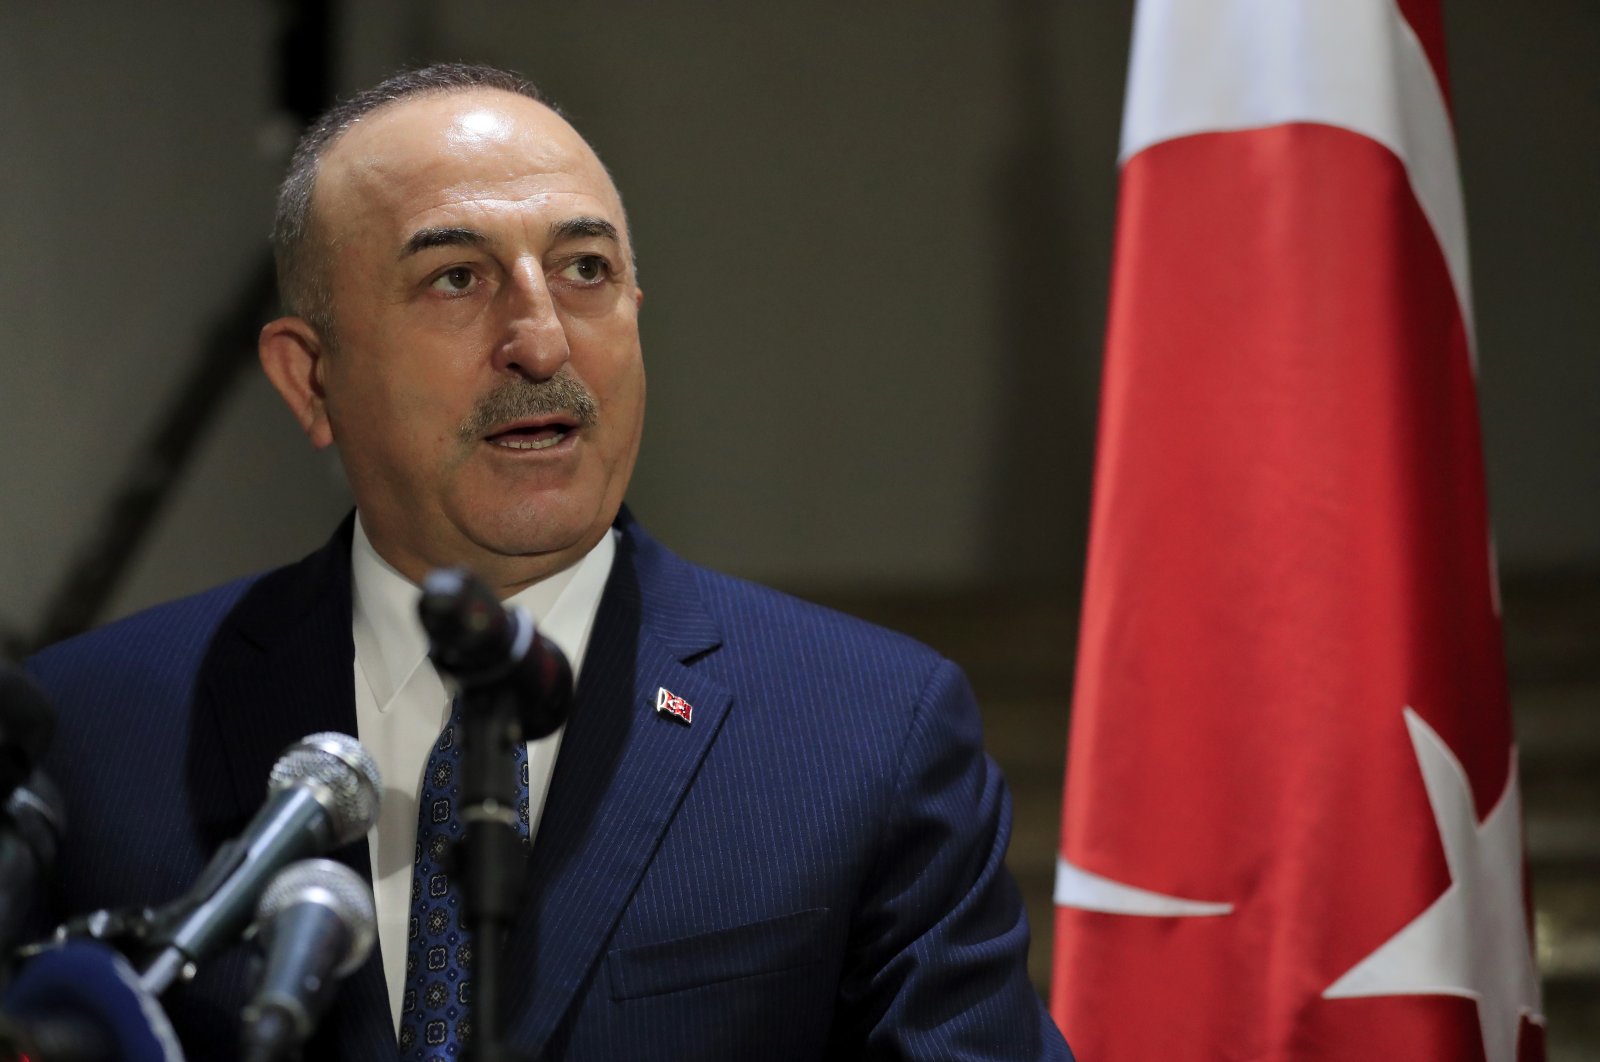 Foreign Minister Mevlüt Çavuşoğlu speaks during a joint press conference with his Lebanese counterpart Abdallah Bou Habib, at the Lebanese Foreign Ministry, in Beirut, Lebanon, Nov. 16, 2021. (AP File Photo)